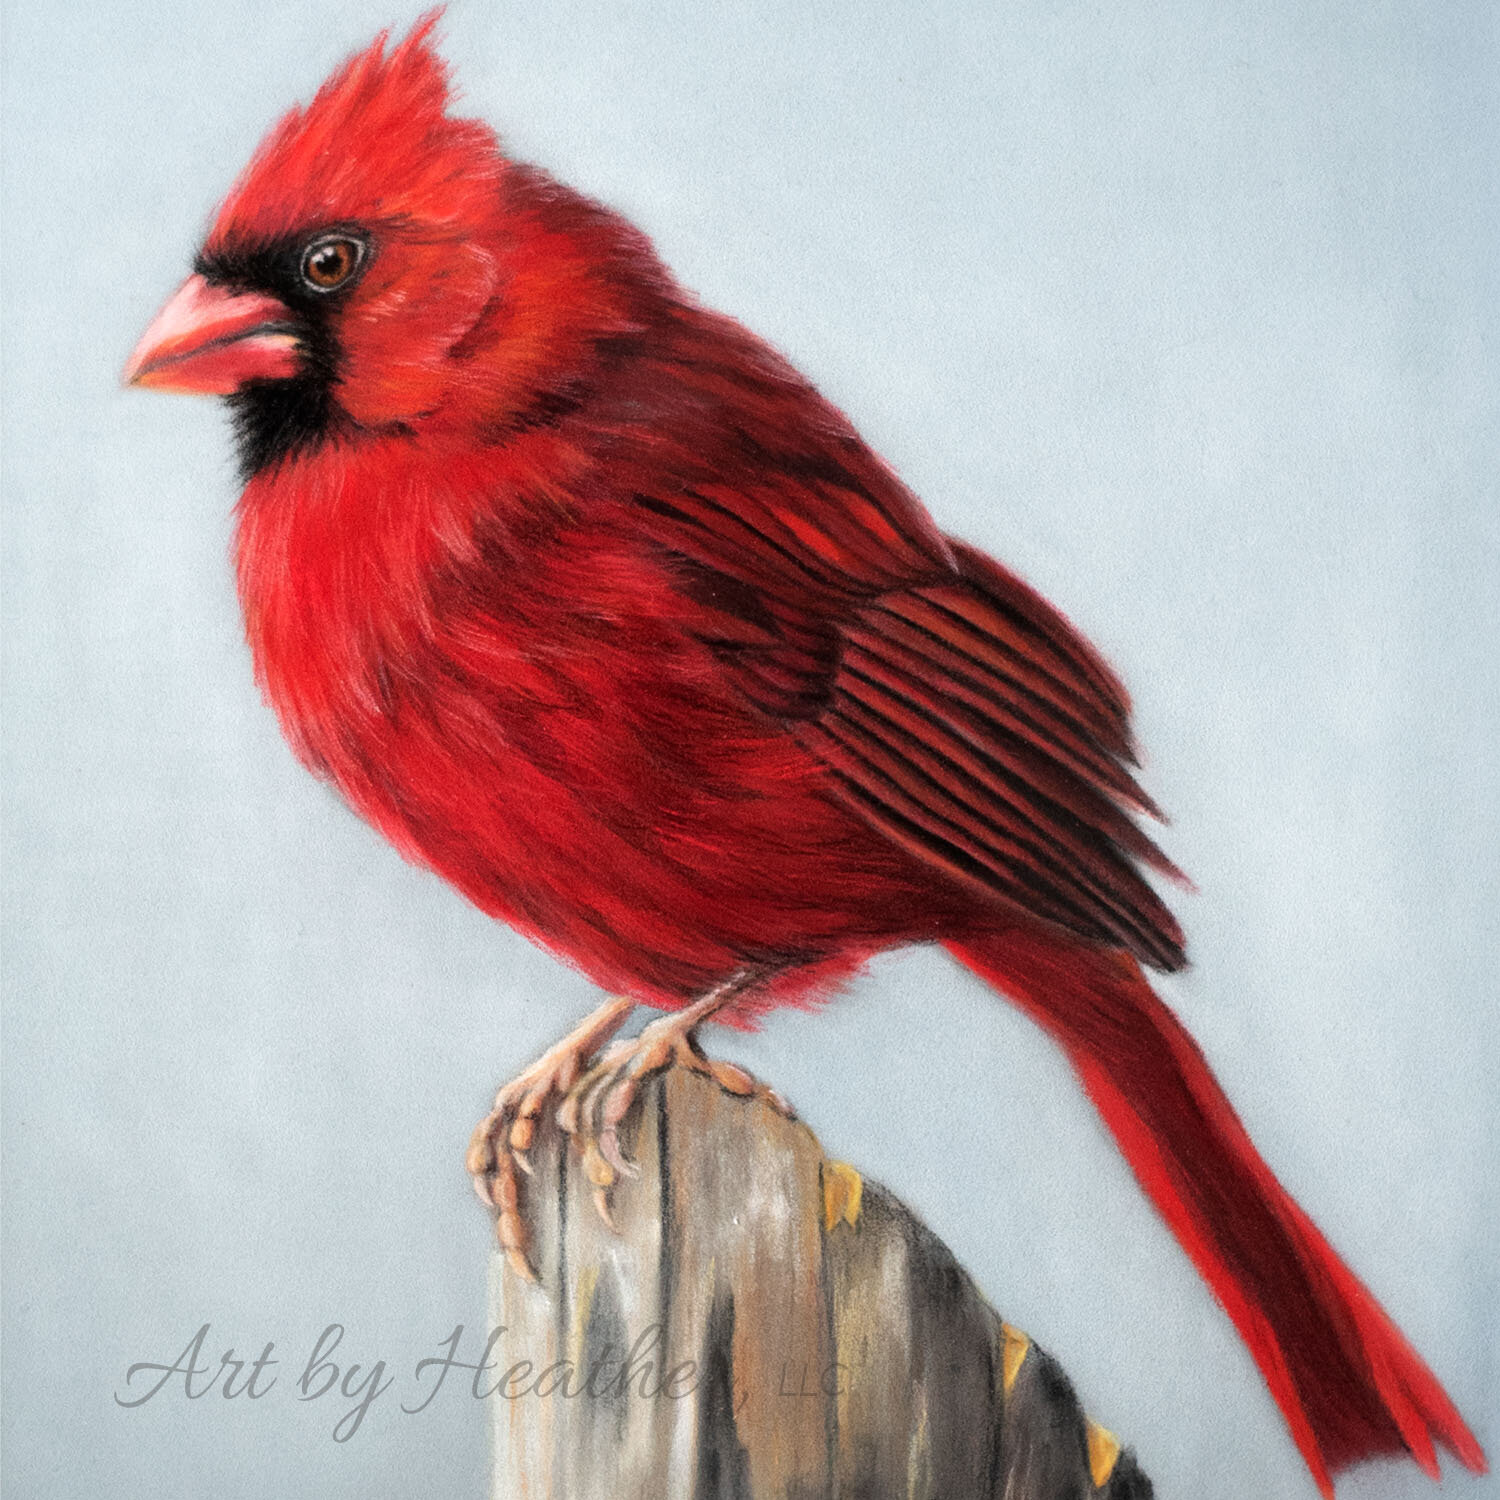 Pastel portrait of a red cardinal with a light blue-gray background.